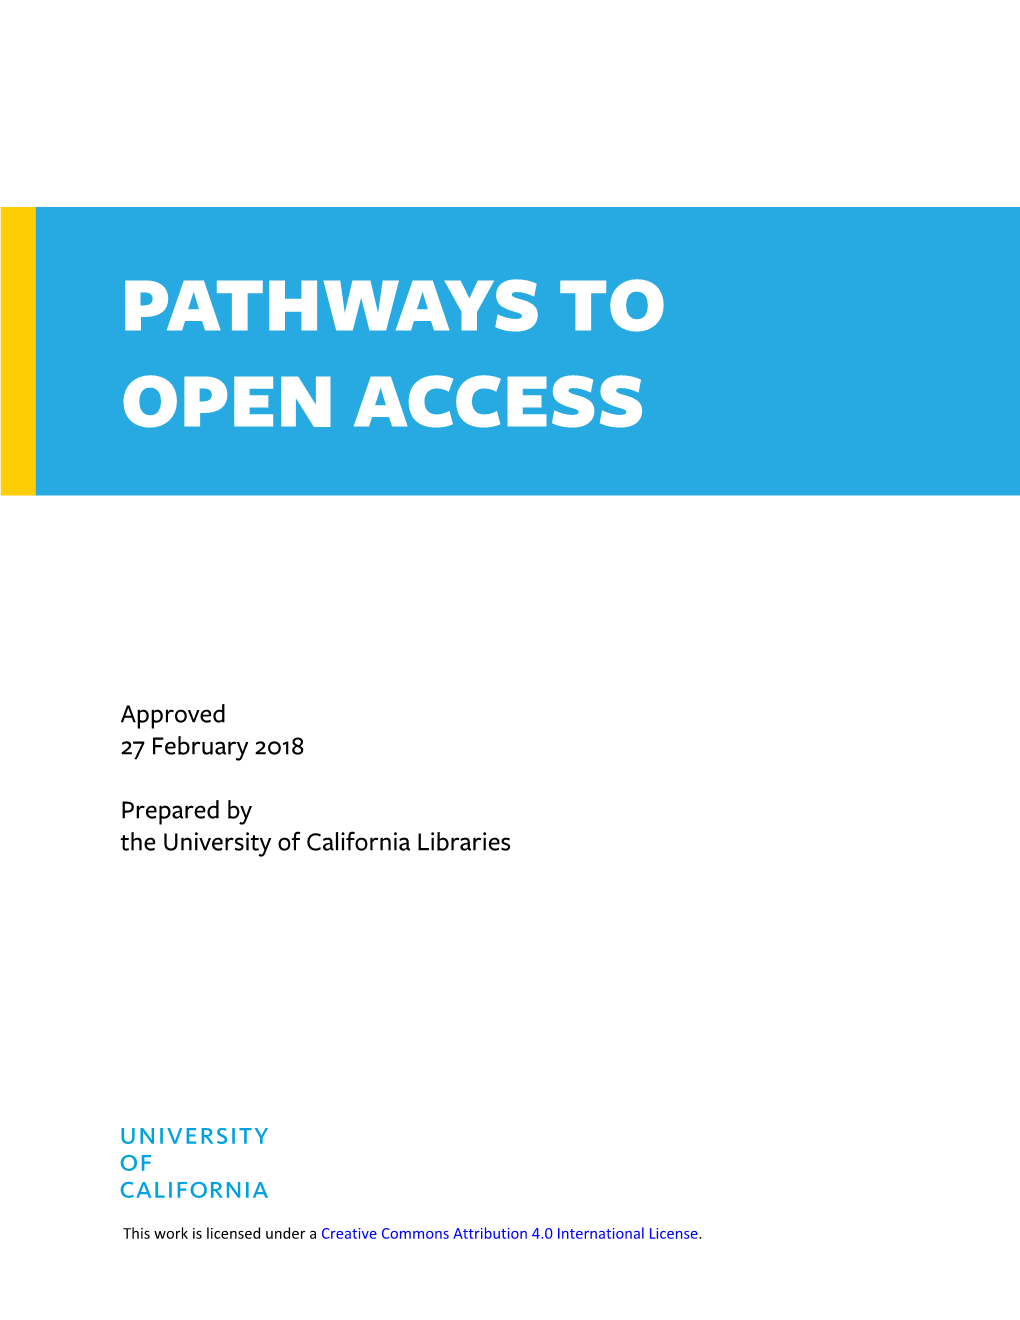 Pathways to Open Access